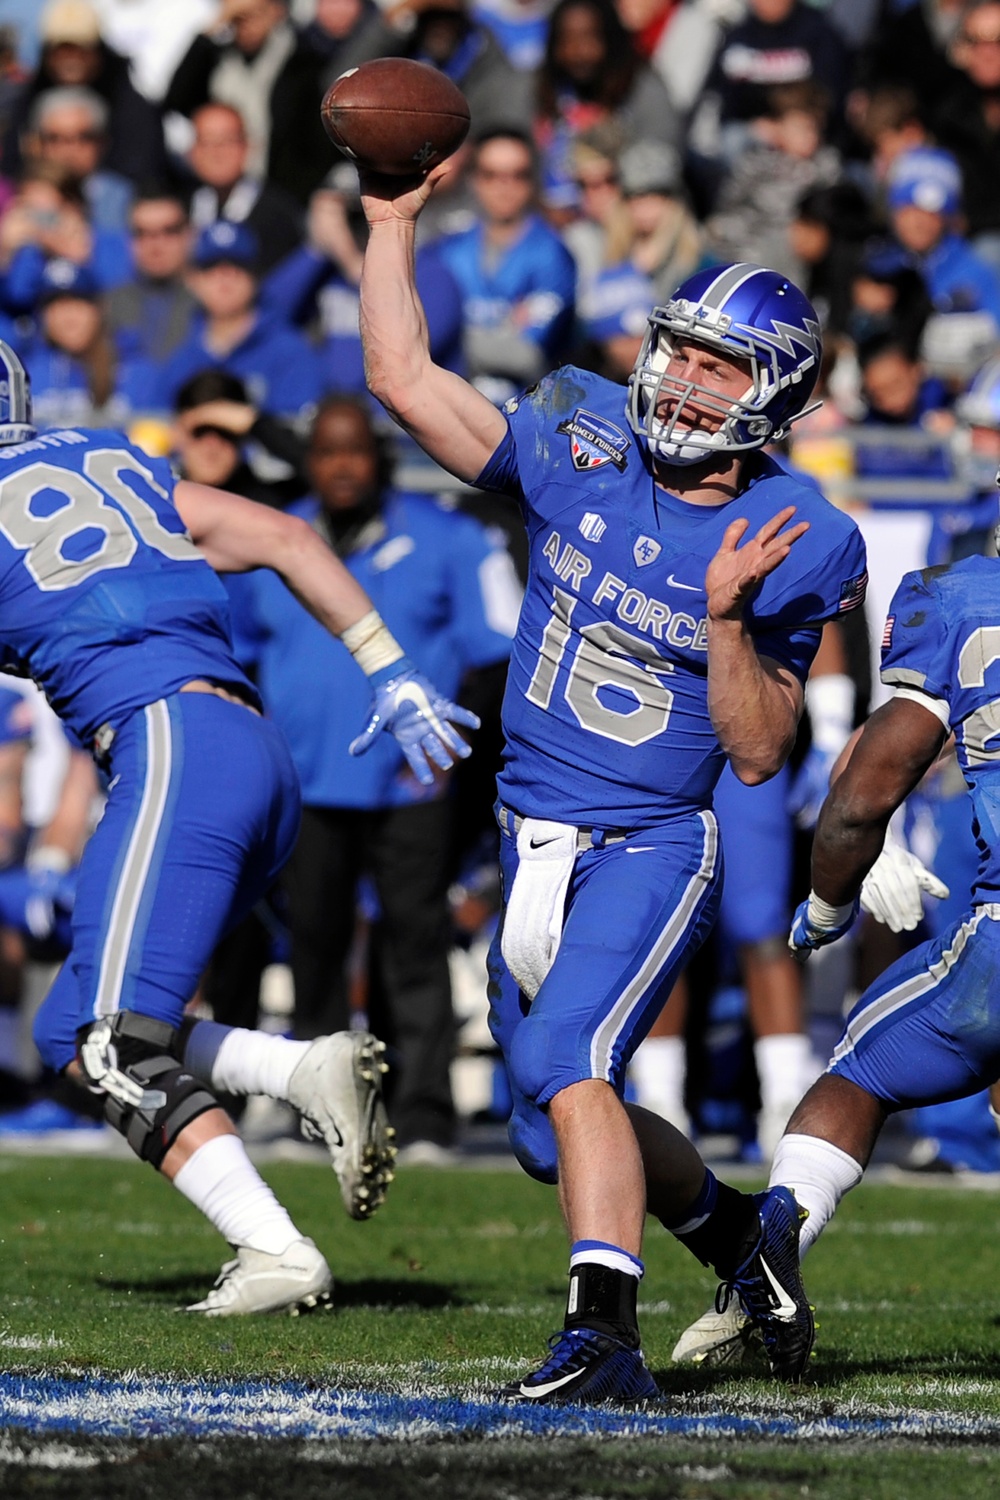 US Air Force Academy Falcons vs. California Golden Bears 2015 Lockheed Martin Armed Forces Bowl